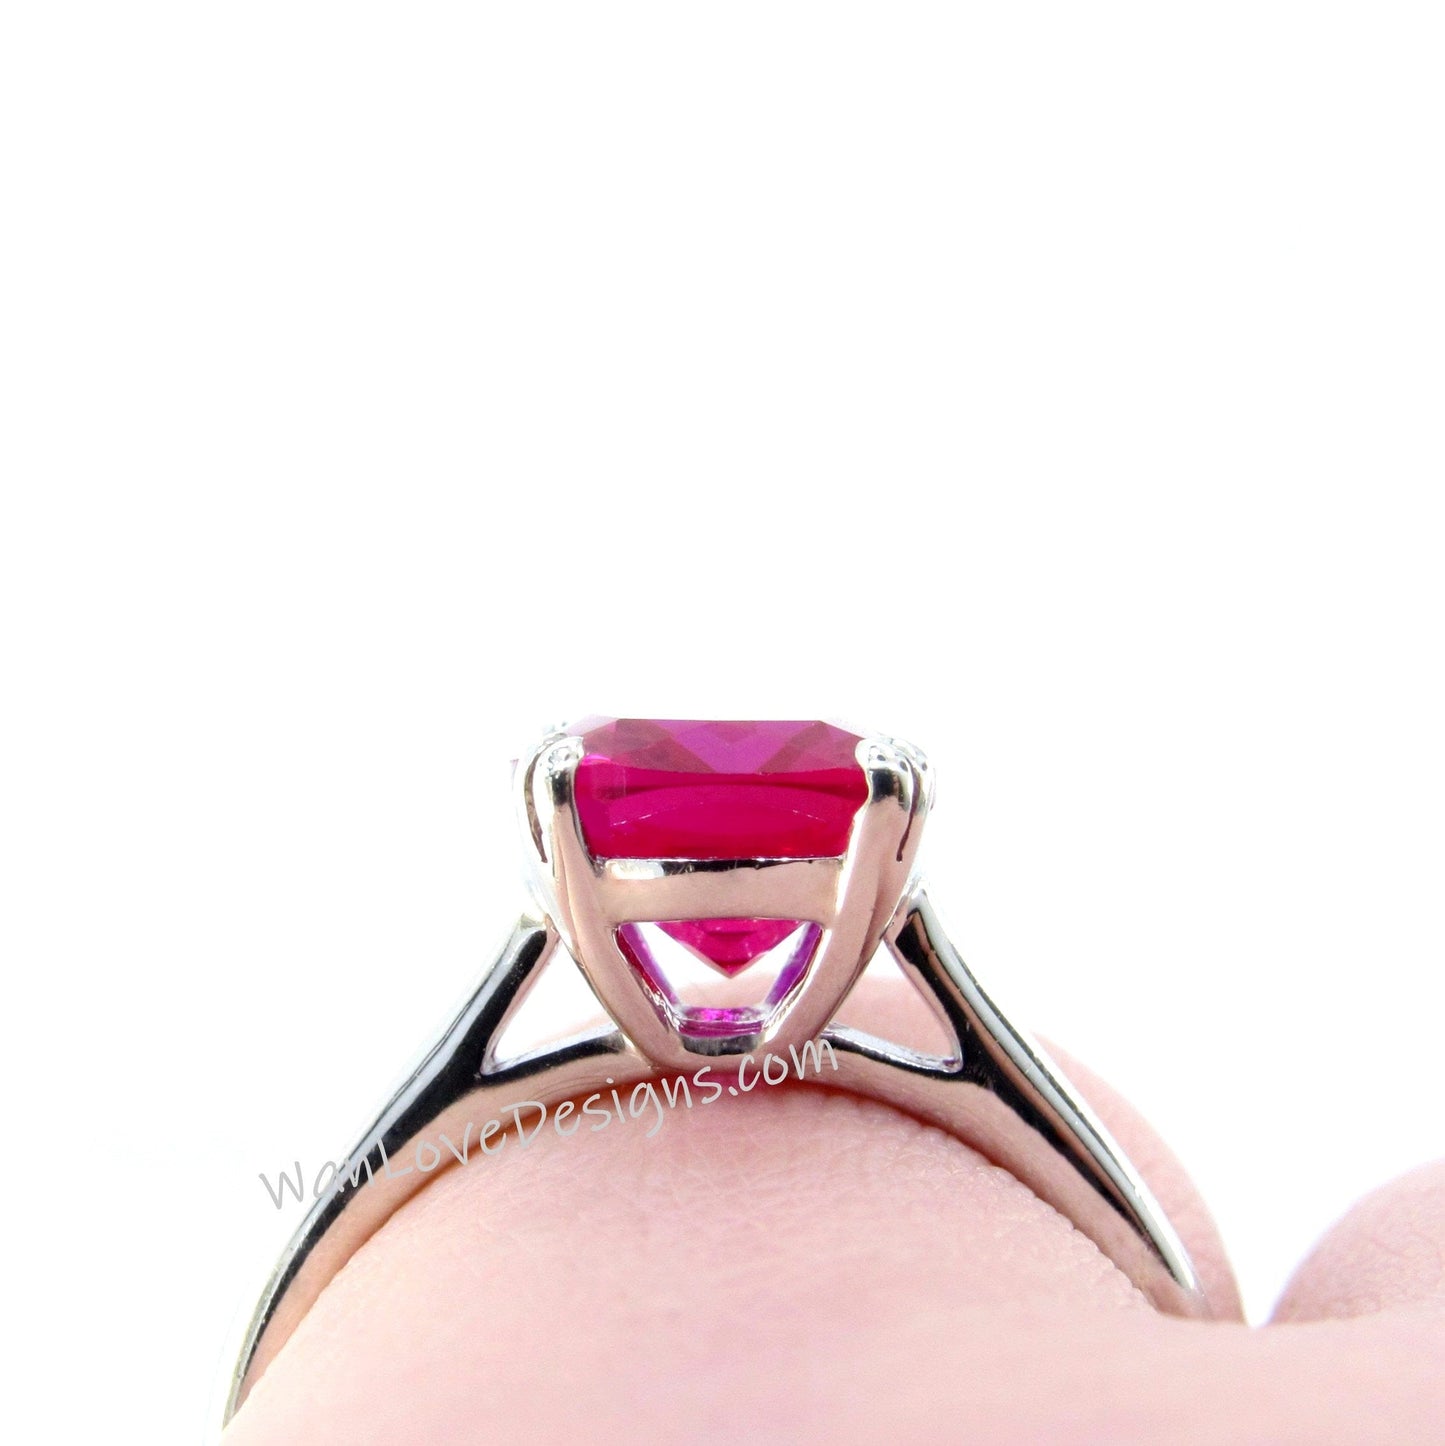 Ruby Elongated Cushion Engagement Ring Solitaire 4ct Carat Vintage Wedding Bridal ring Anniversary promise prong ring Gift-Ready to Ship Wan Love Designs